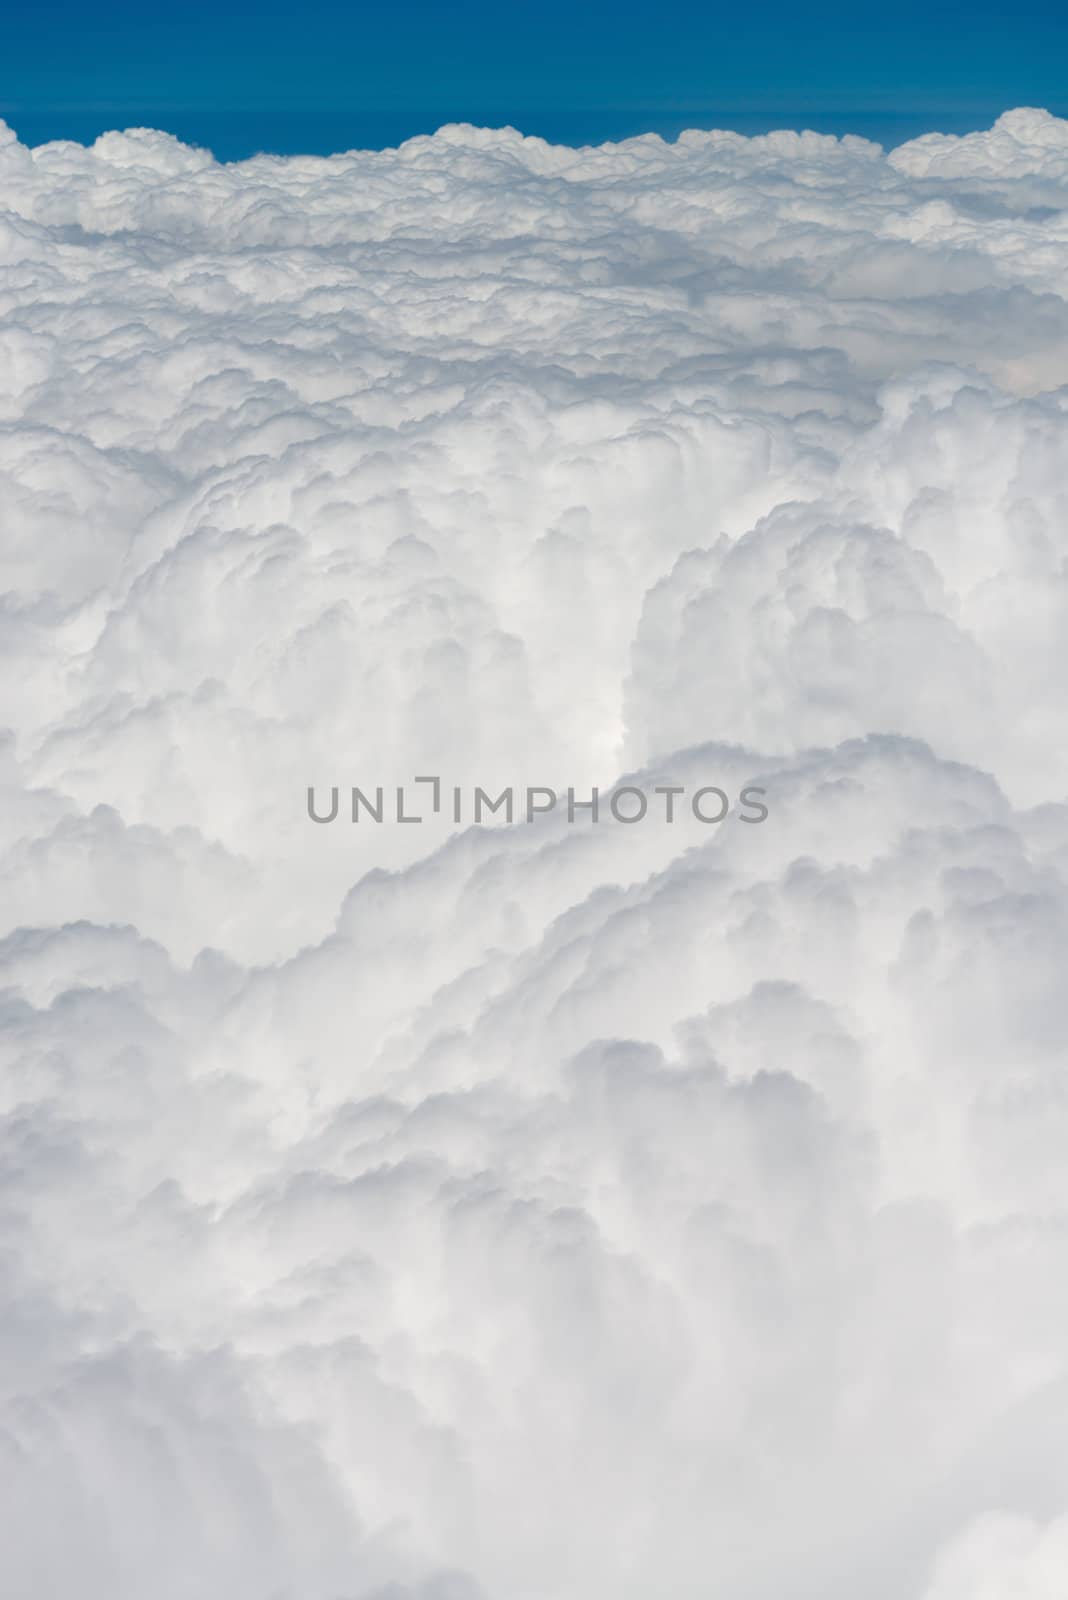 Atmosphere - blue sky and white clouds background 